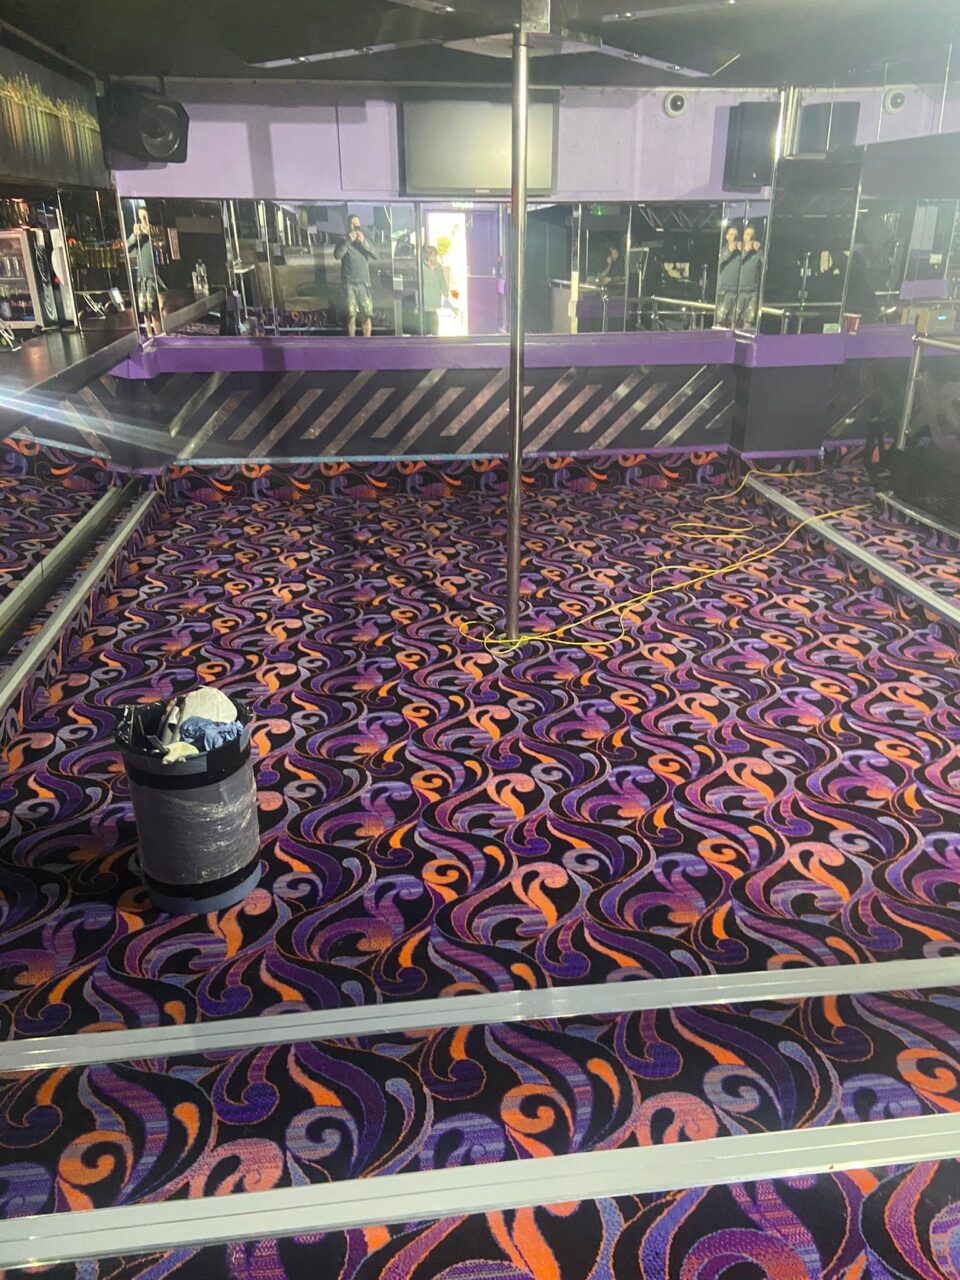 Acapulco Nightclub Halifax pole dancing area with bespoke purple and black patterned carpets designed by Wilton Carpets